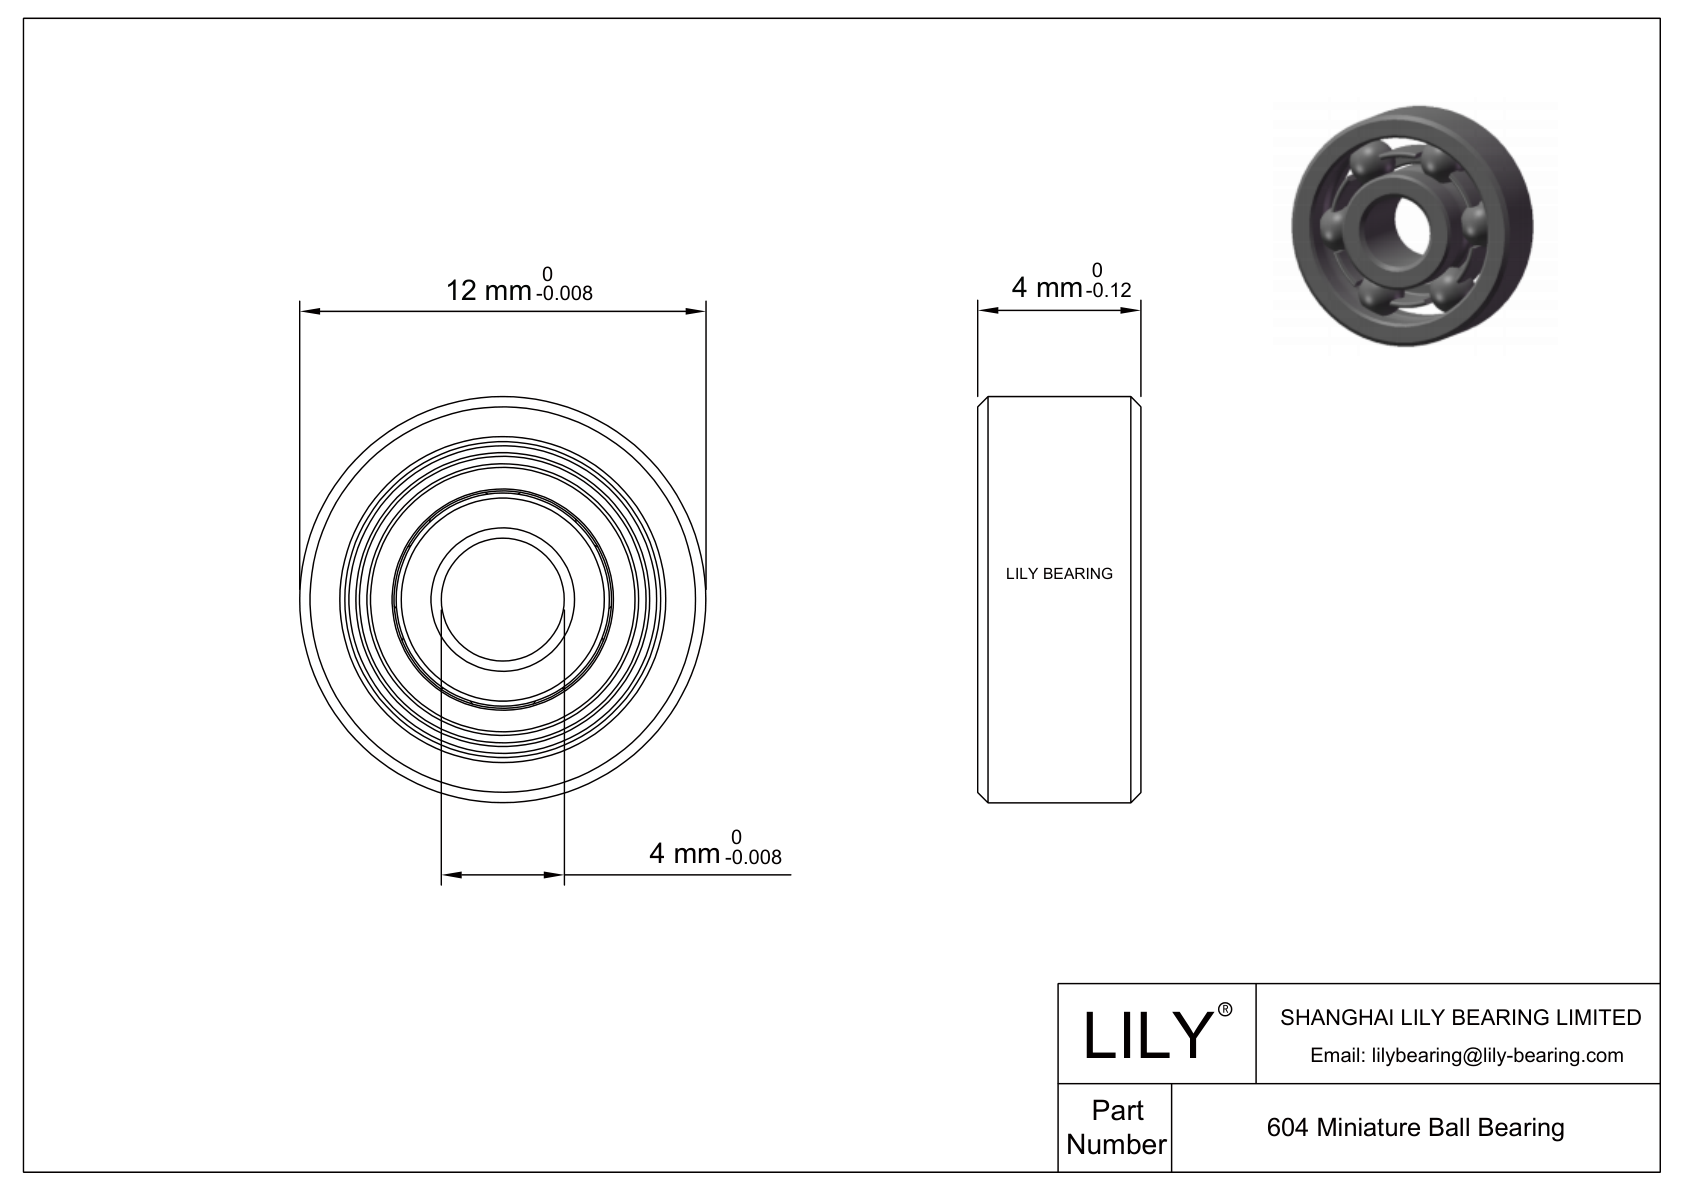 LILY-BS60416-9 POM Coated Bearing cad drawing